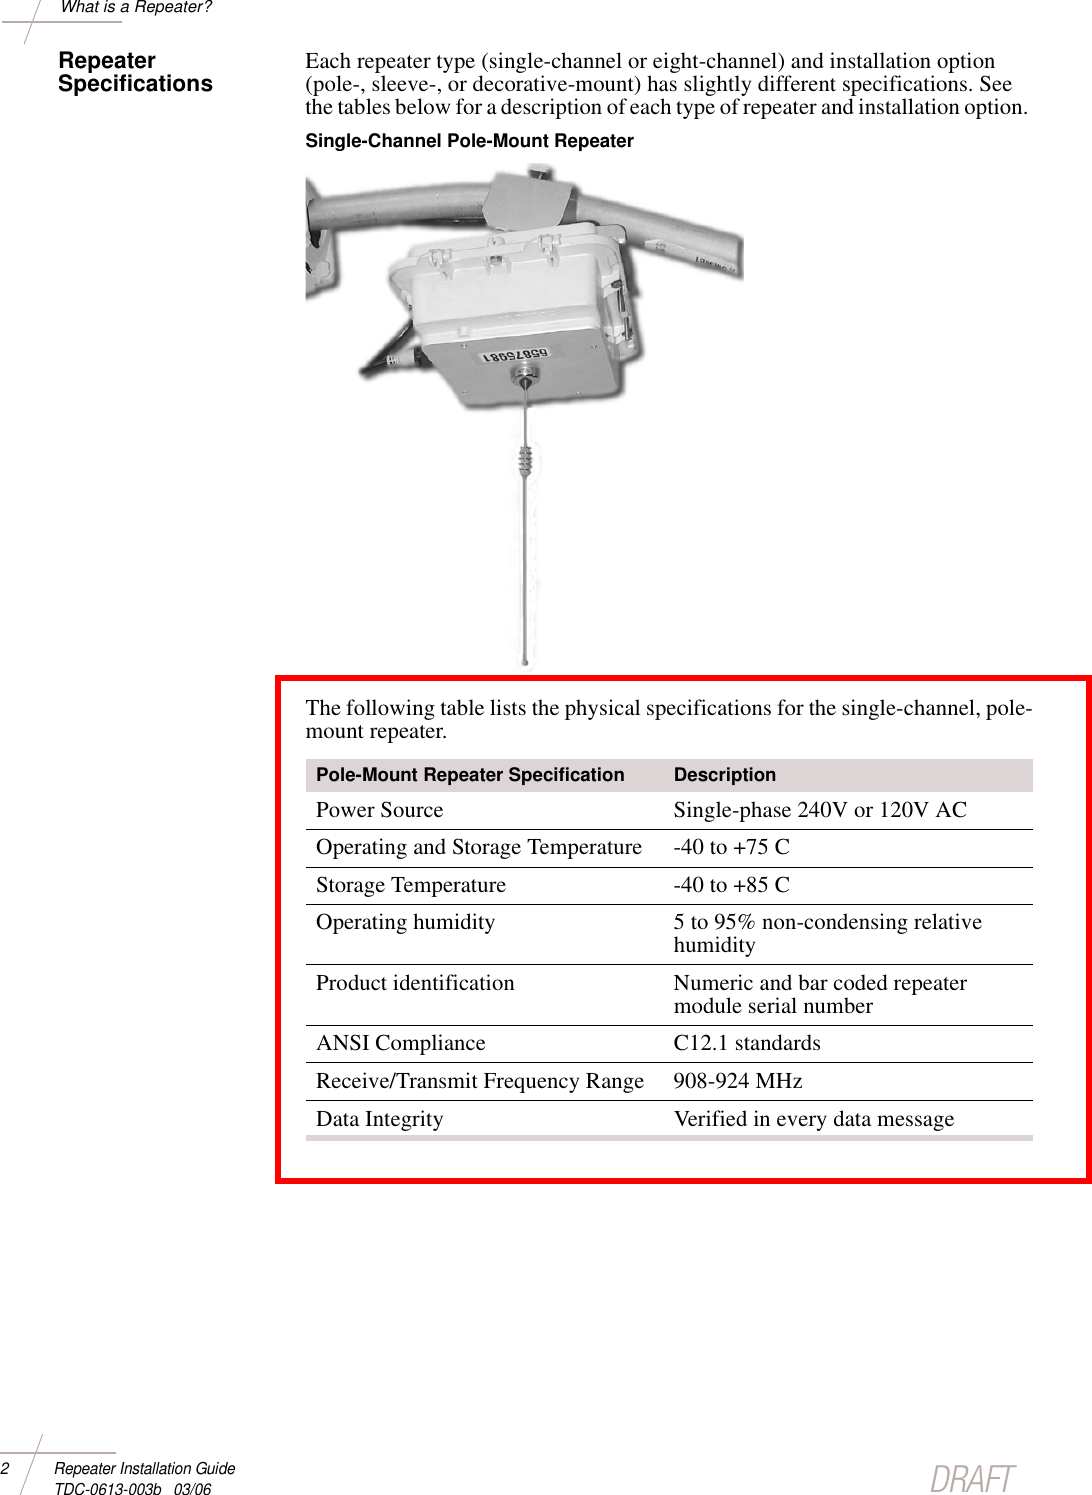 DRAFT2 Repeater Installation Guide TDC-0613-003b   03/06What is a Repeater?Repeater Specifications Each repeater type (single-channel or eight-channel) and installation option (pole-, sleeve-, or decorative-mount) has slightly different specifications. See the tables below for a description of each type of repeater and installation option. Single-Channel Pole-Mount Repeater The following table lists the physical specifications for the single-channel, pole-mount repeater. Pole-Mount Repeater Specification DescriptionPower Source Single-phase 240V or 120V ACOperating and Storage Temperature -40 to +75 C Storage Temperature -40 to +85 C Operating humidity 5 to 95% non-condensing relative humidityProduct identification Numeric and bar coded repeater module serial numberANSI Compliance C12.1 standardsReceive/Transmit Frequency Range 908-924 MHzData Integrity Verified in every data message